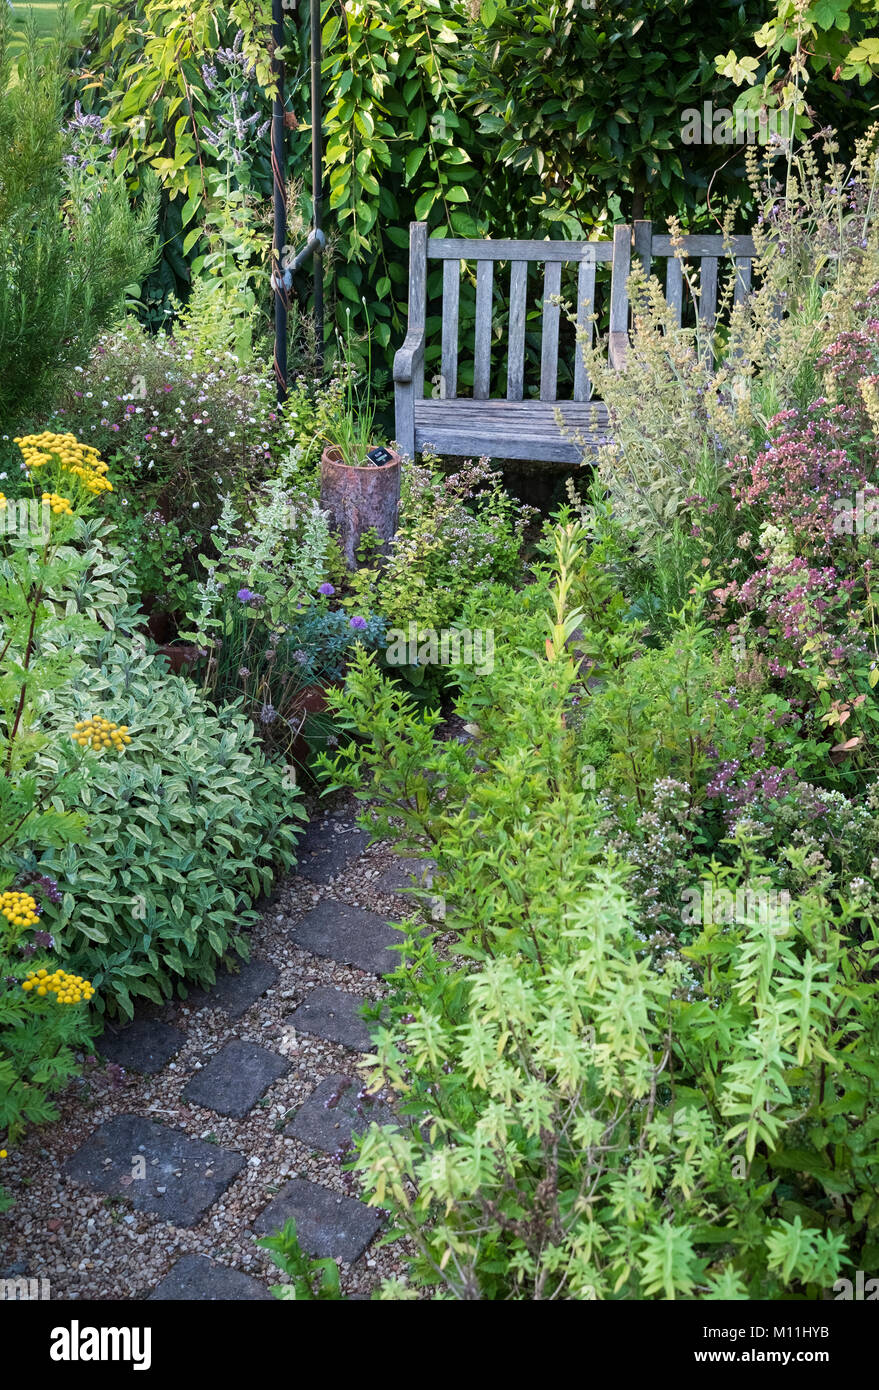 Small herb garden with wooden seating area, summer, August, England, UK Stock Photo